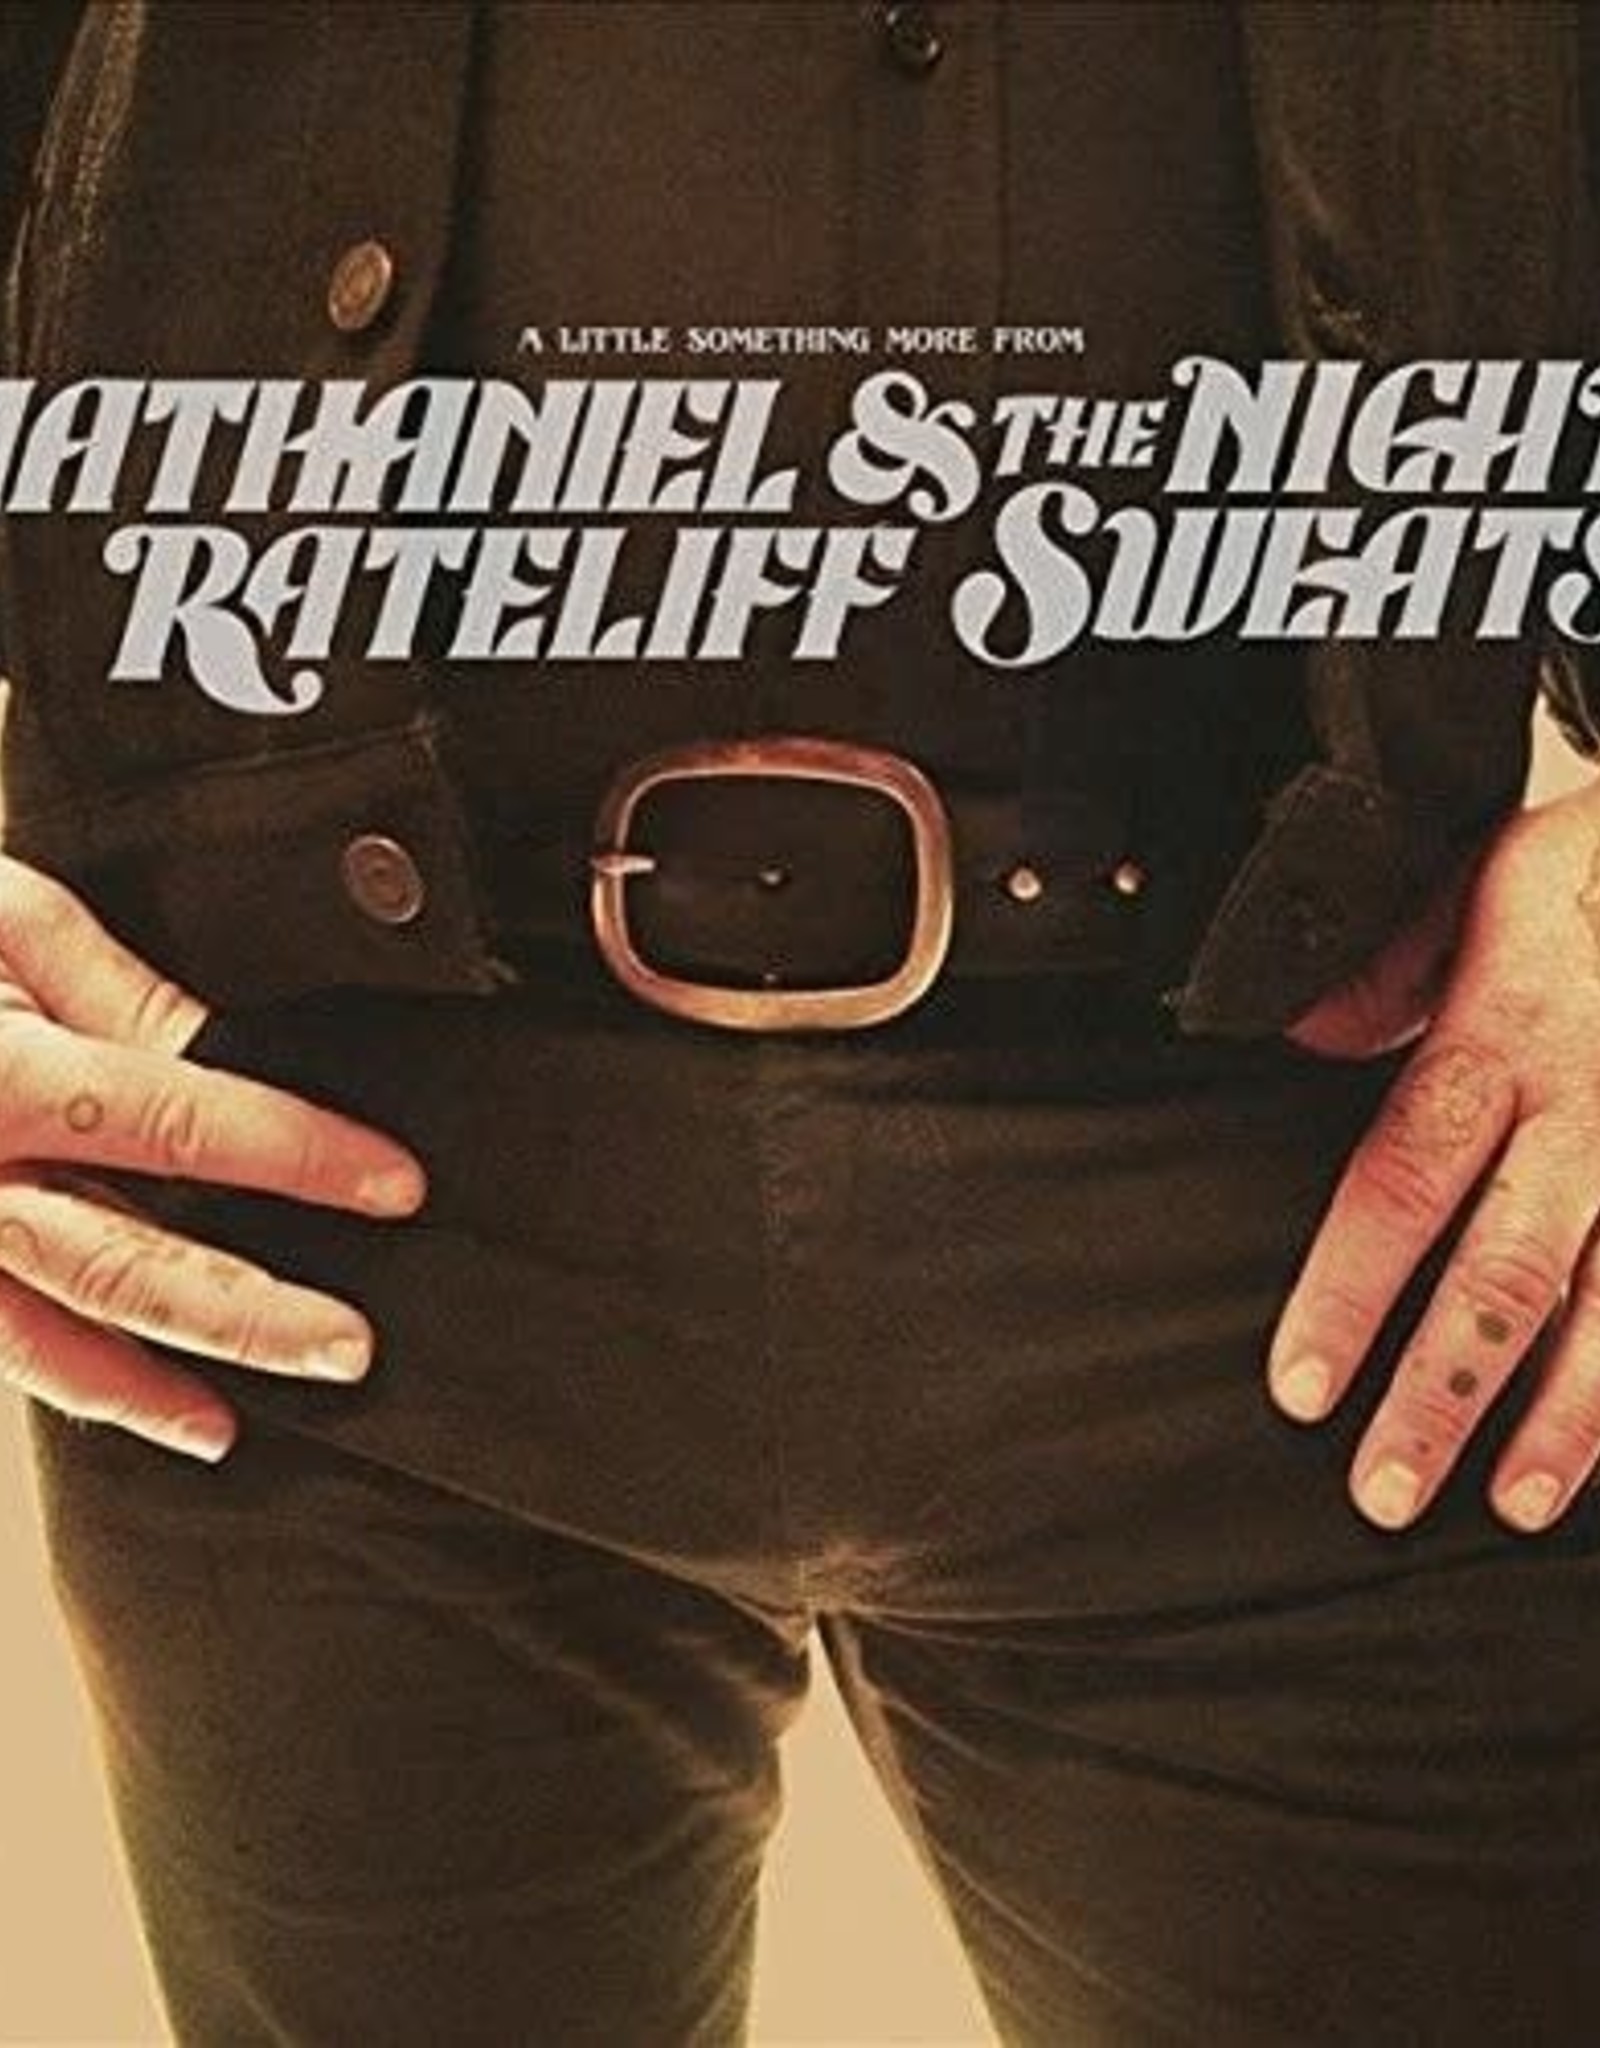 Nathaniel Rateliff & the Night Sweats - a Little Something More From